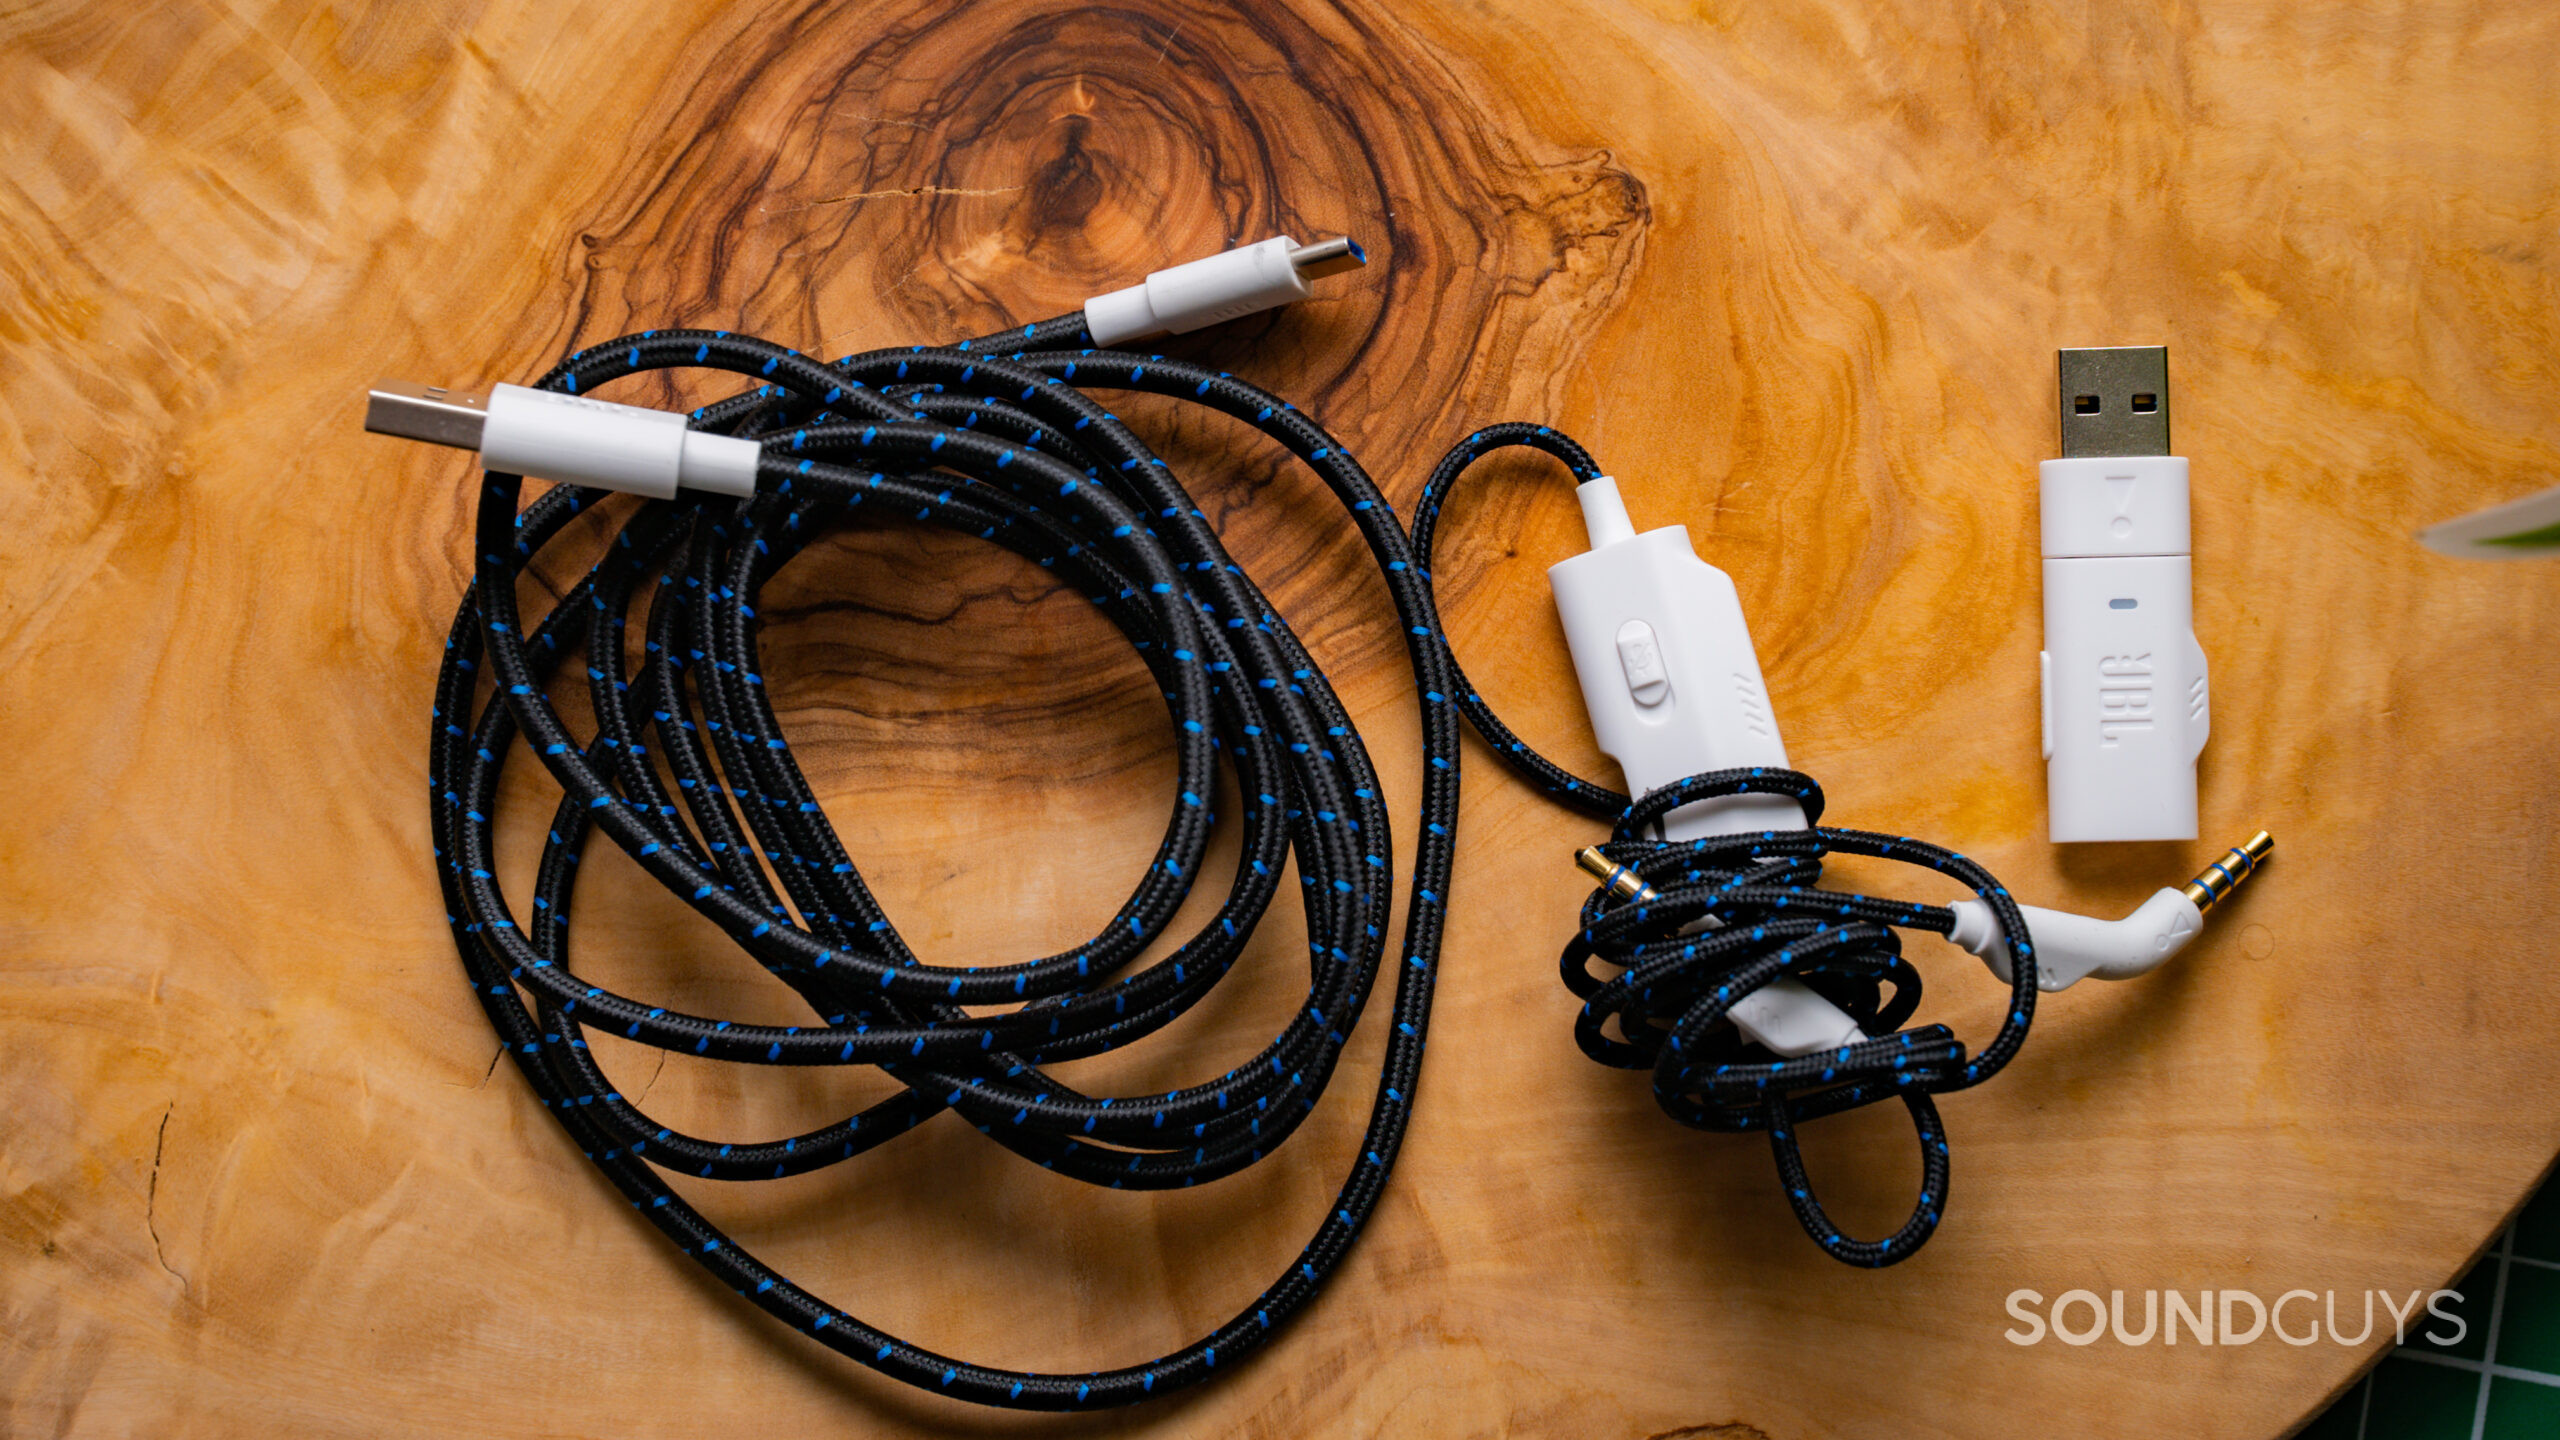 The JBL Quantum 910P cable sitting on top of a wooden tabletop.